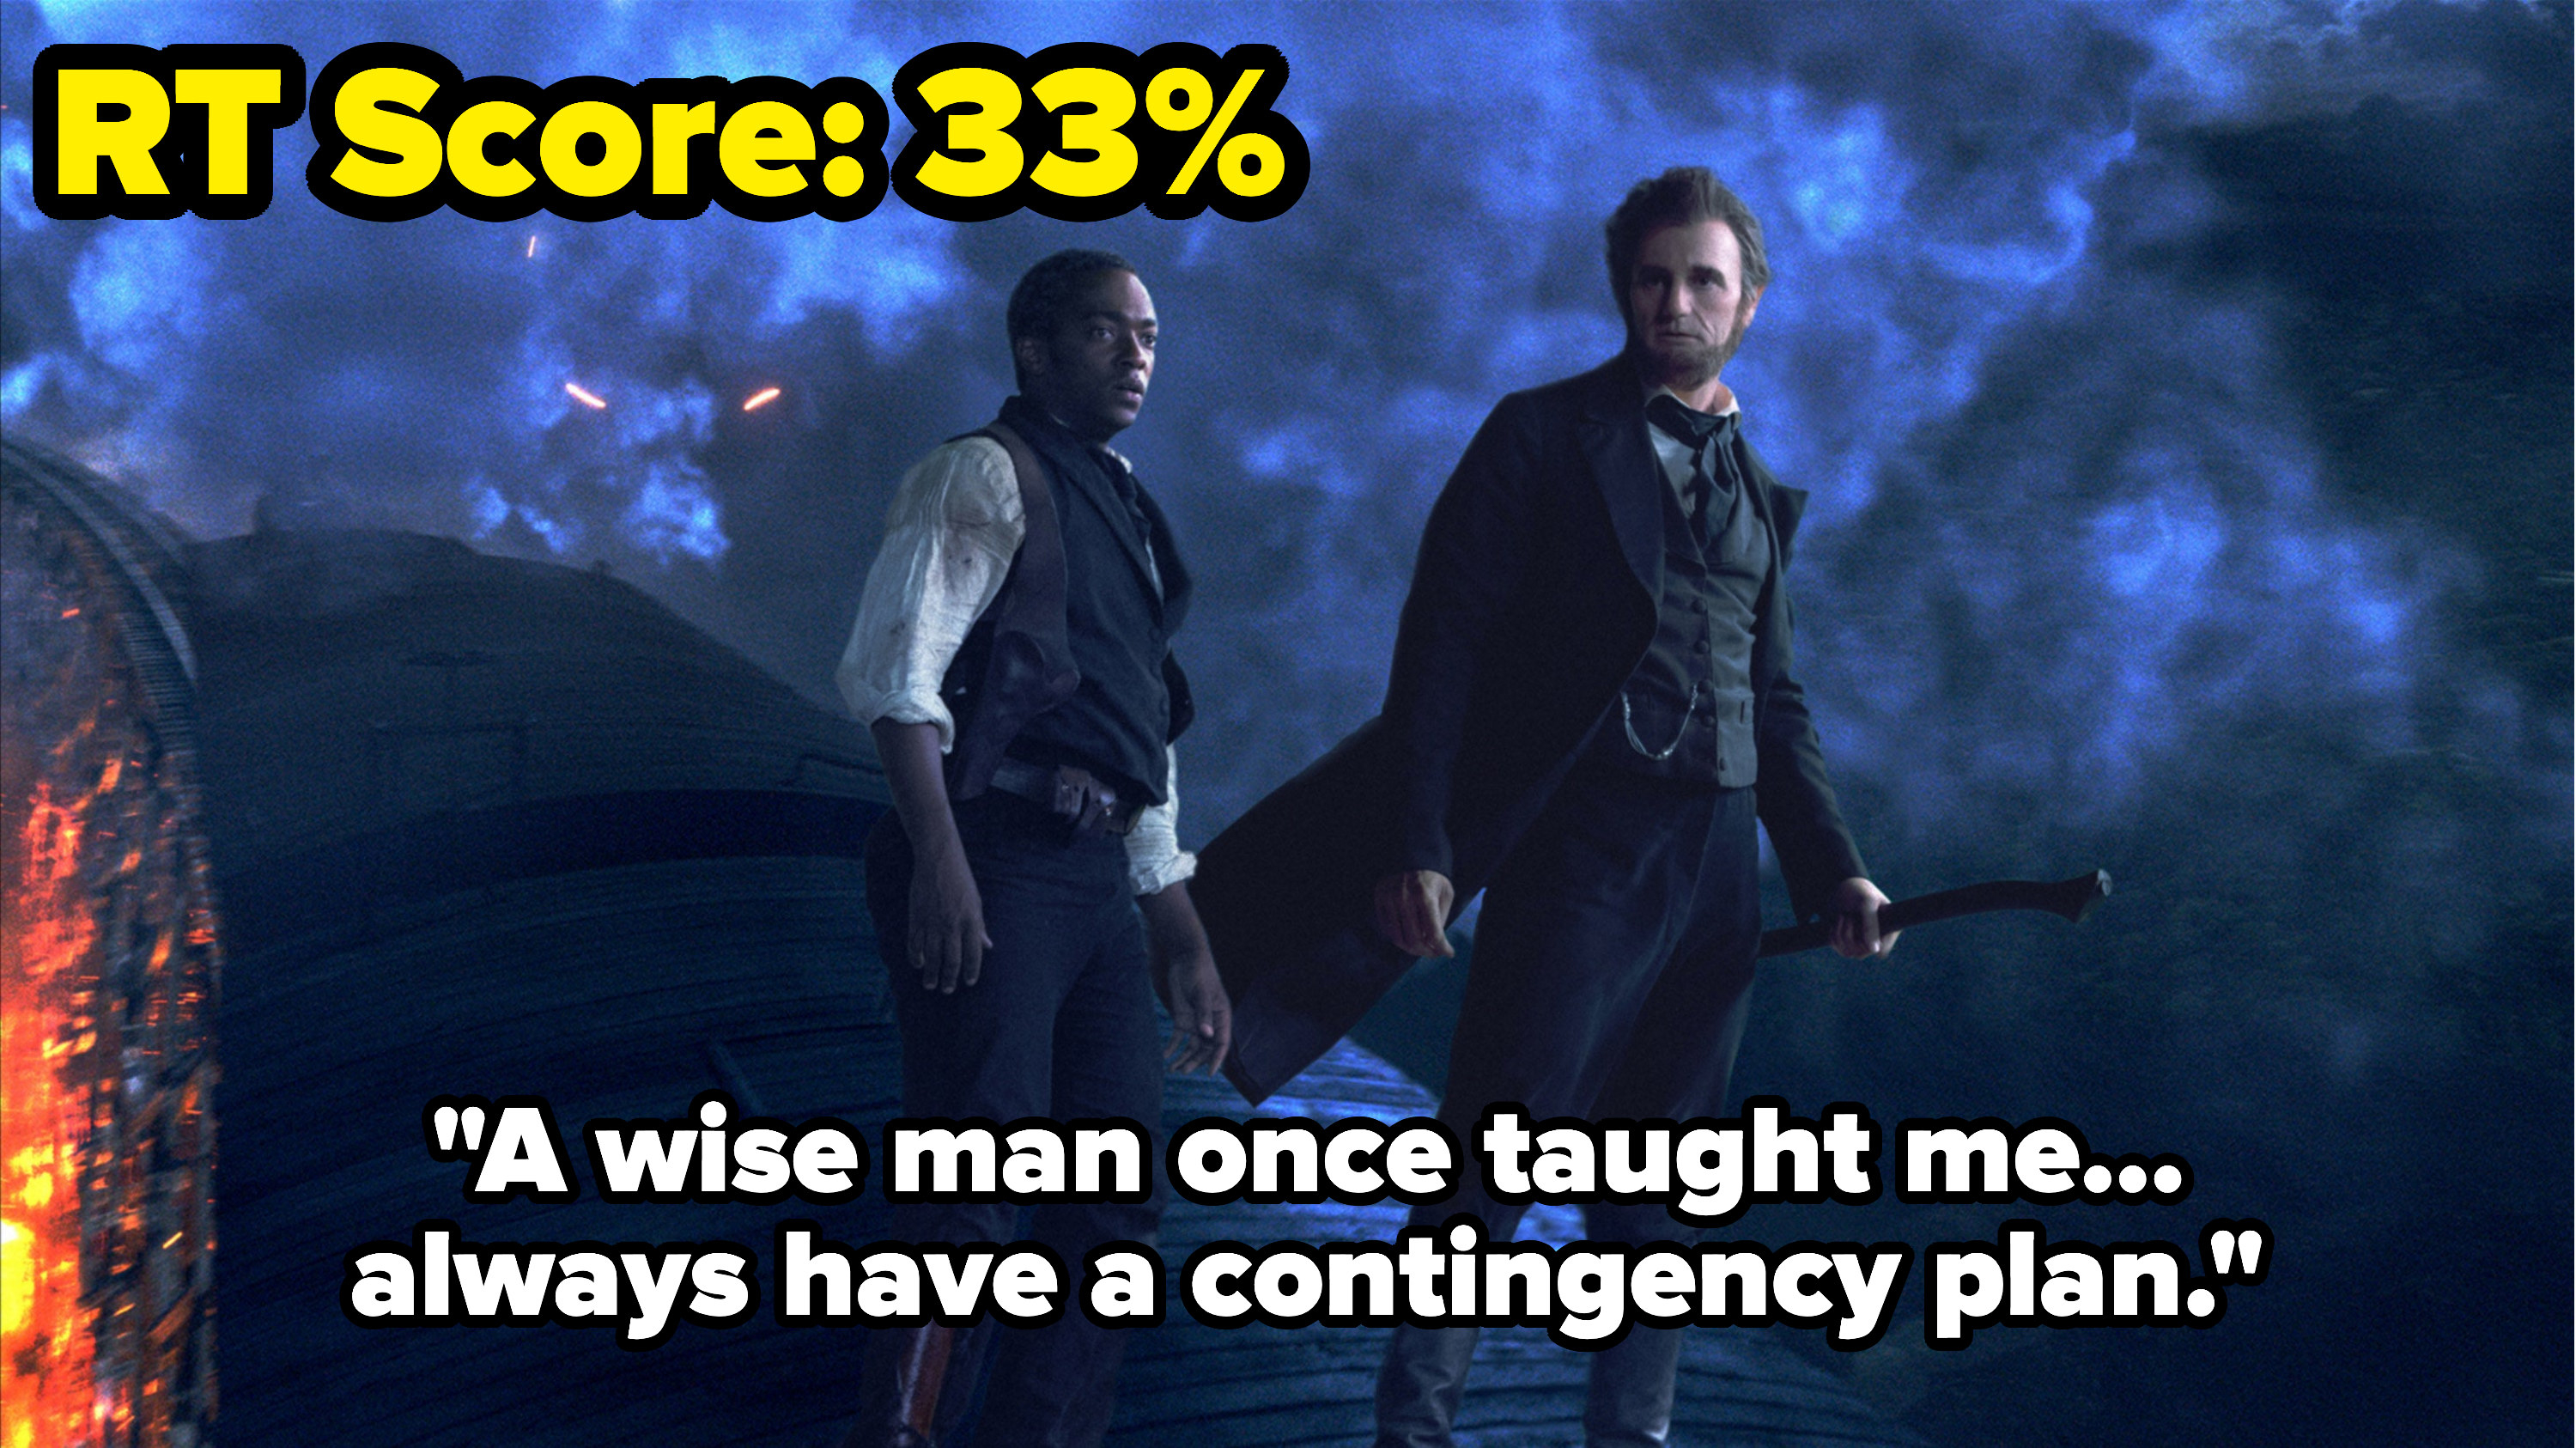 &quot;A wise man once taught me... always have a contingency plan.&quot;